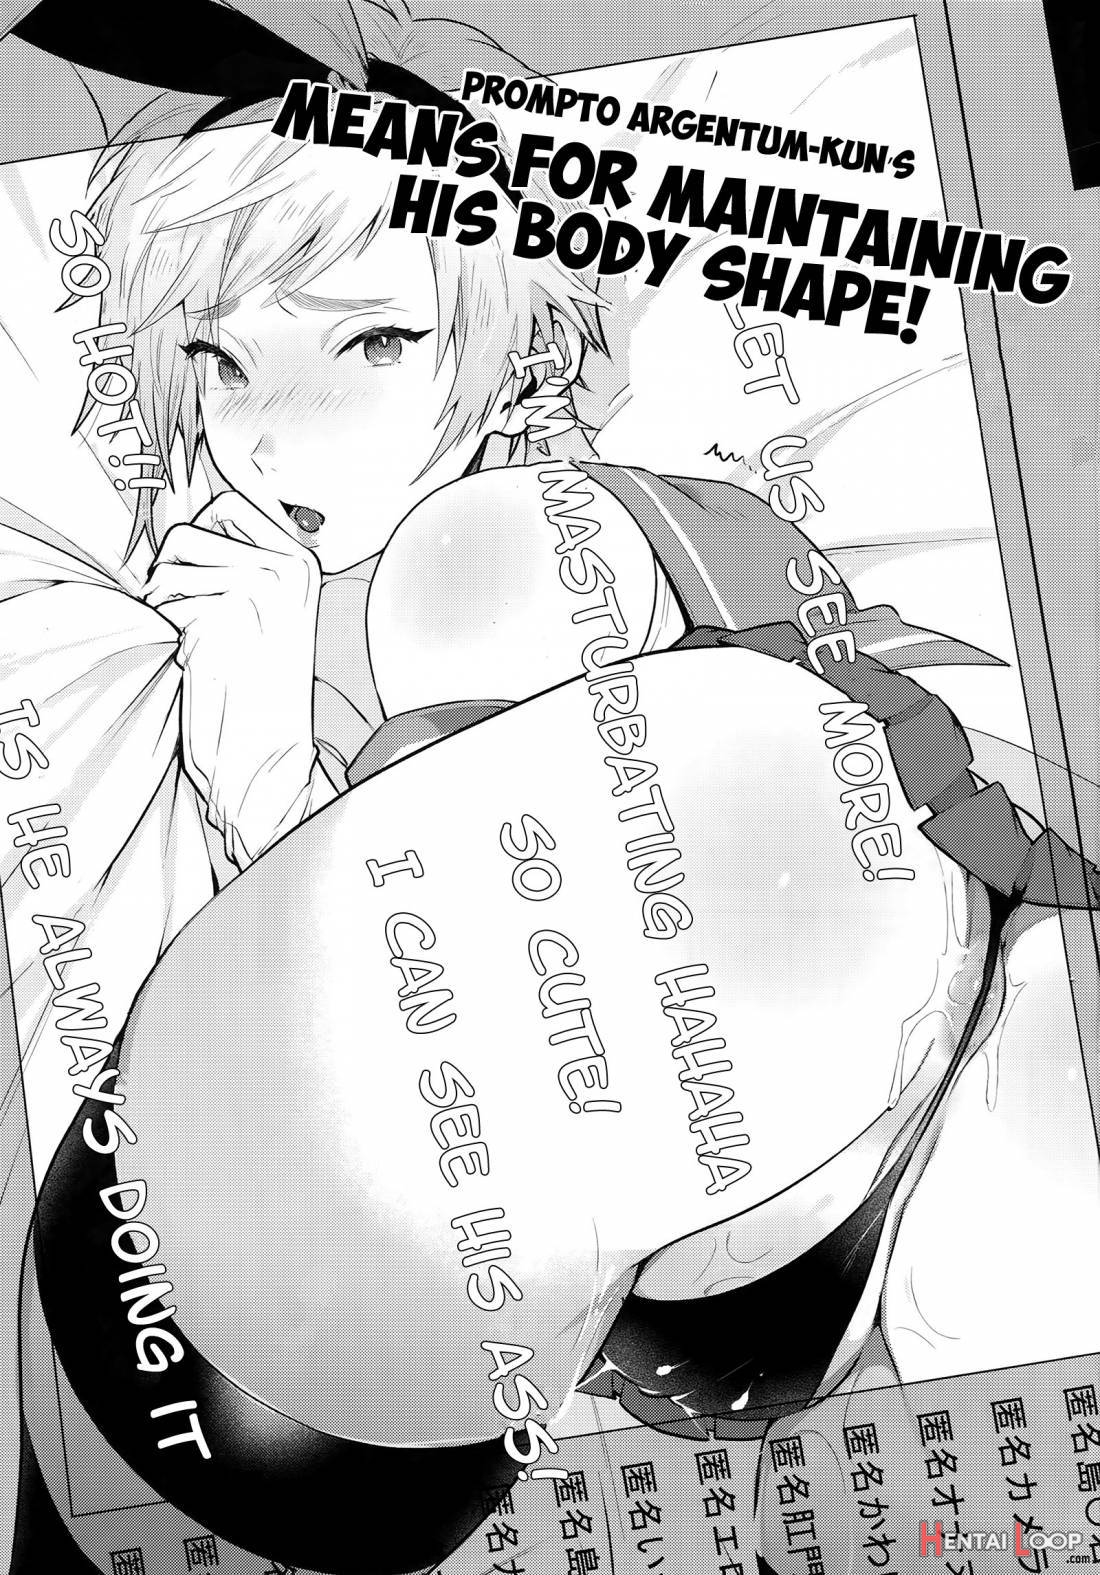 Prompto Argentum-kun’s Means For Maintaining His Body Shape! page 2